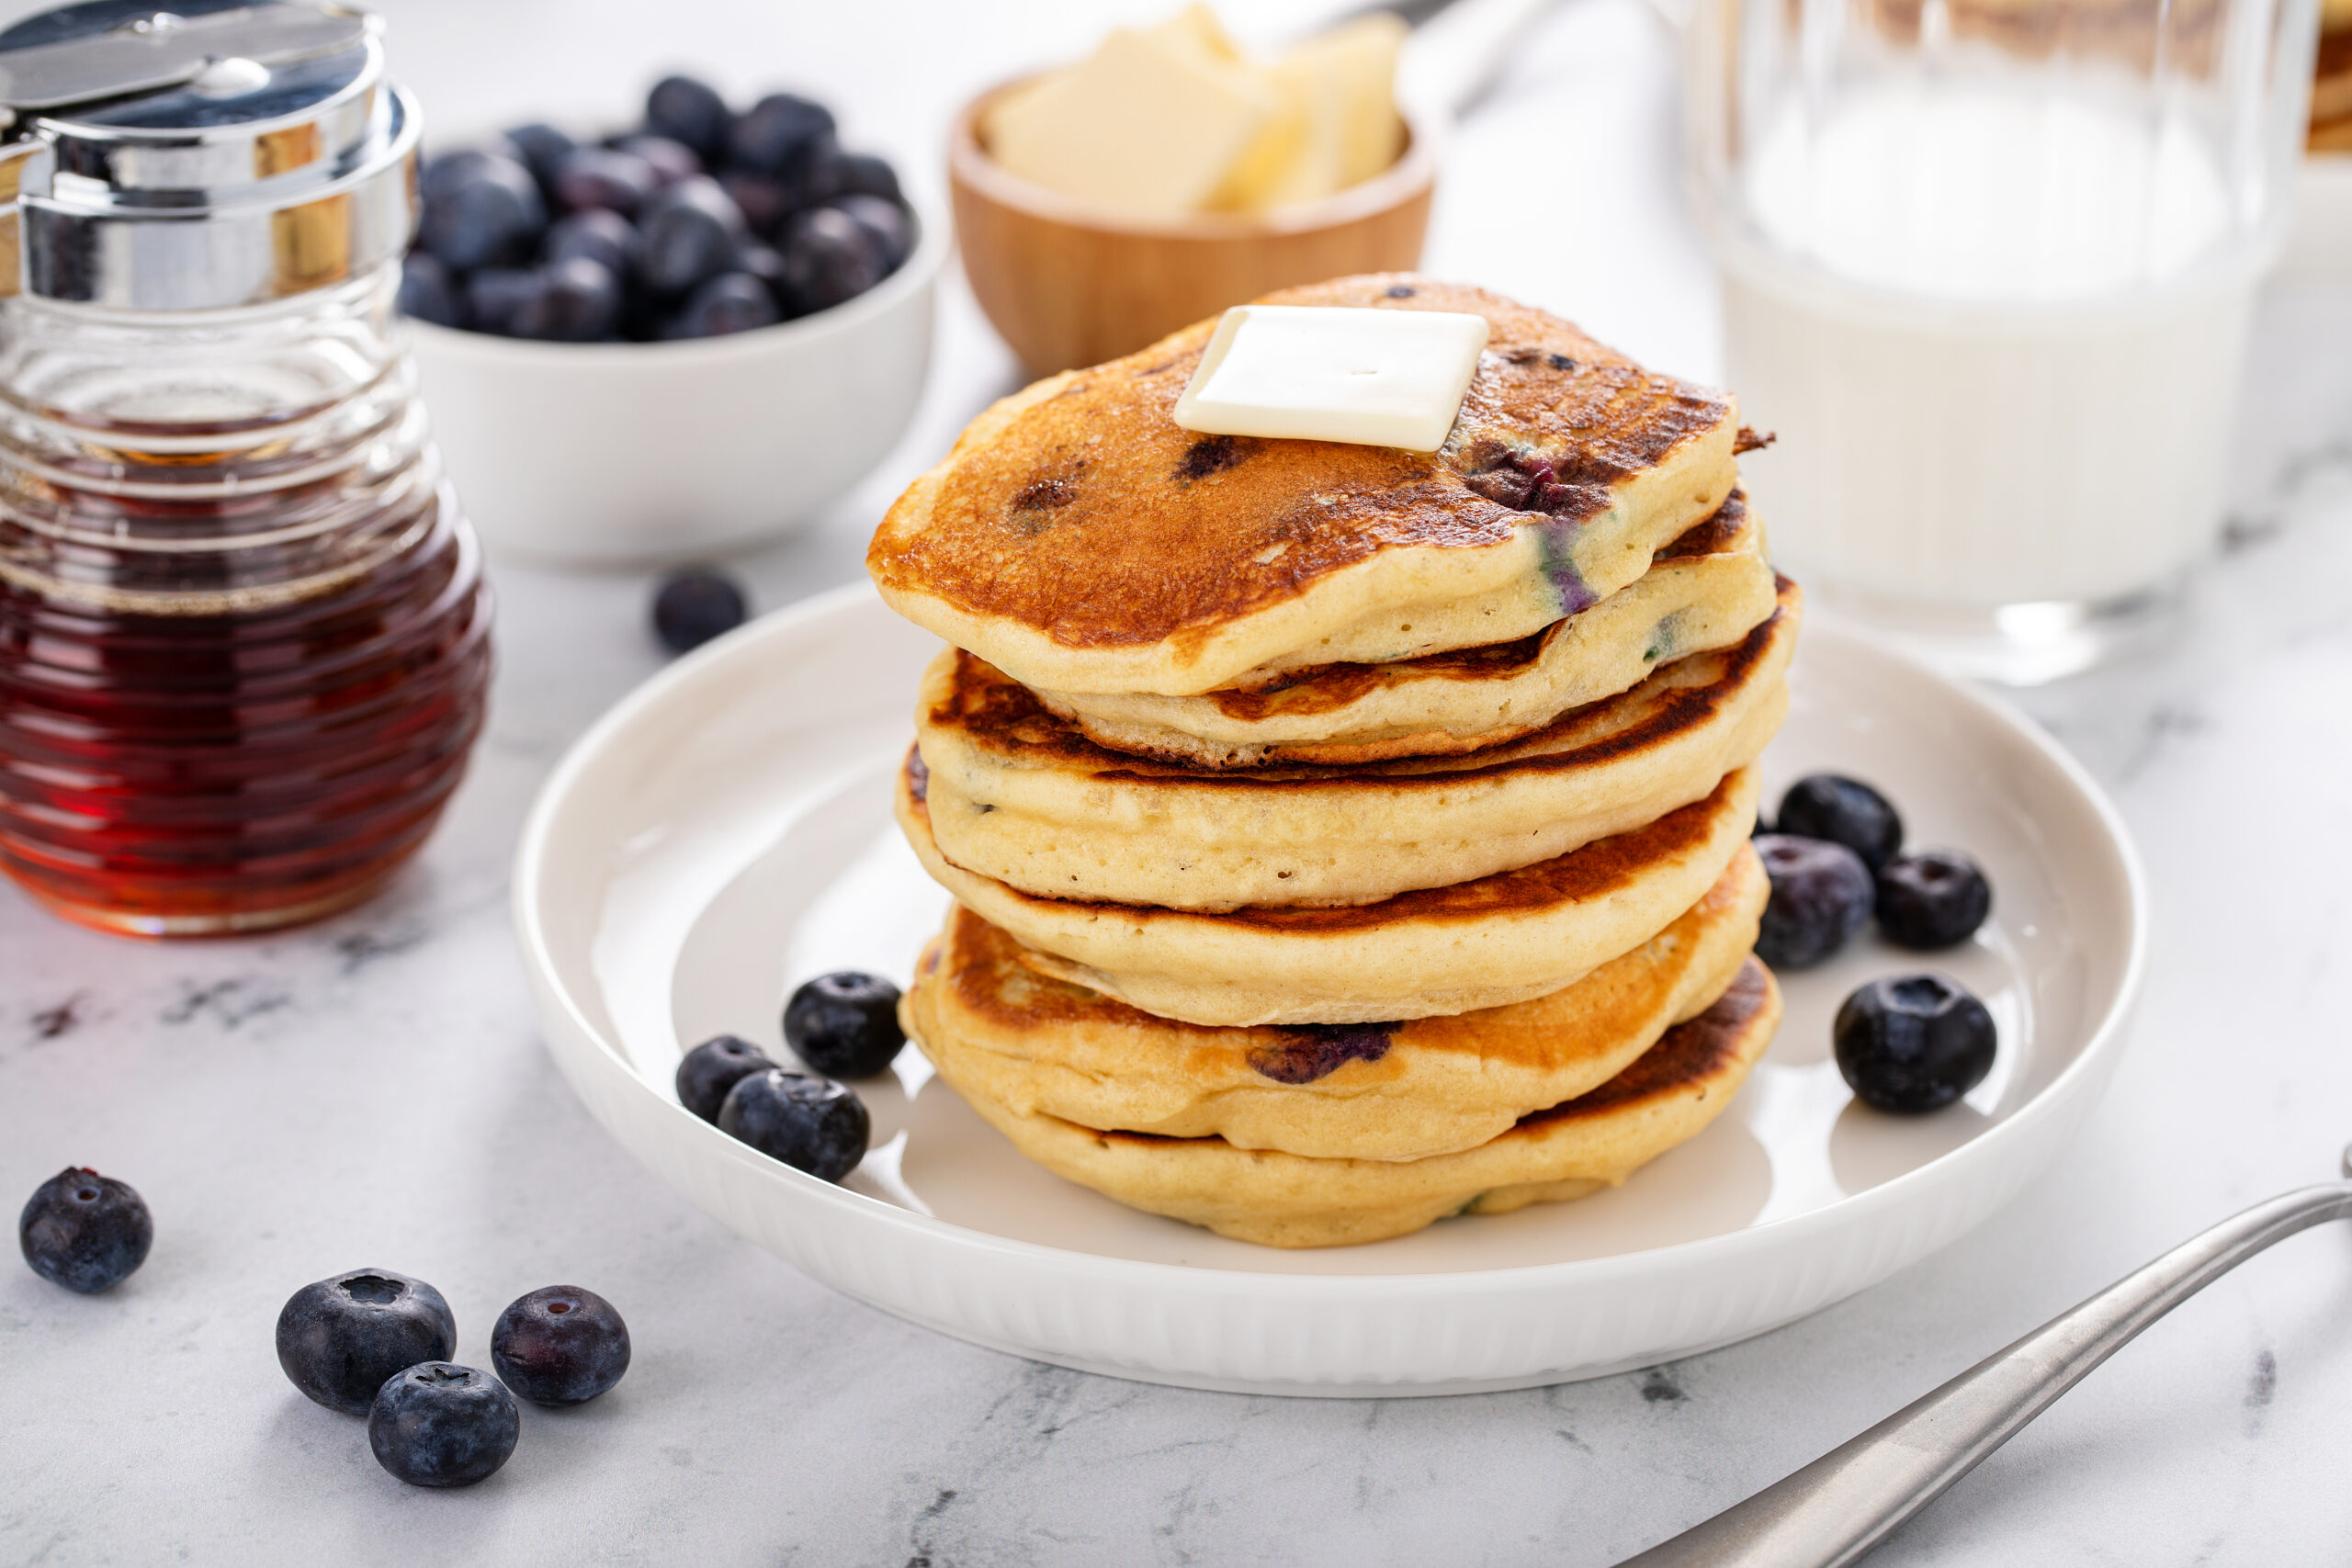 Looking for the BEST blueberry pancake recipe ever? CLICK HERE to try this mouth watering any time breakfast favorite that will be a hit in any household!